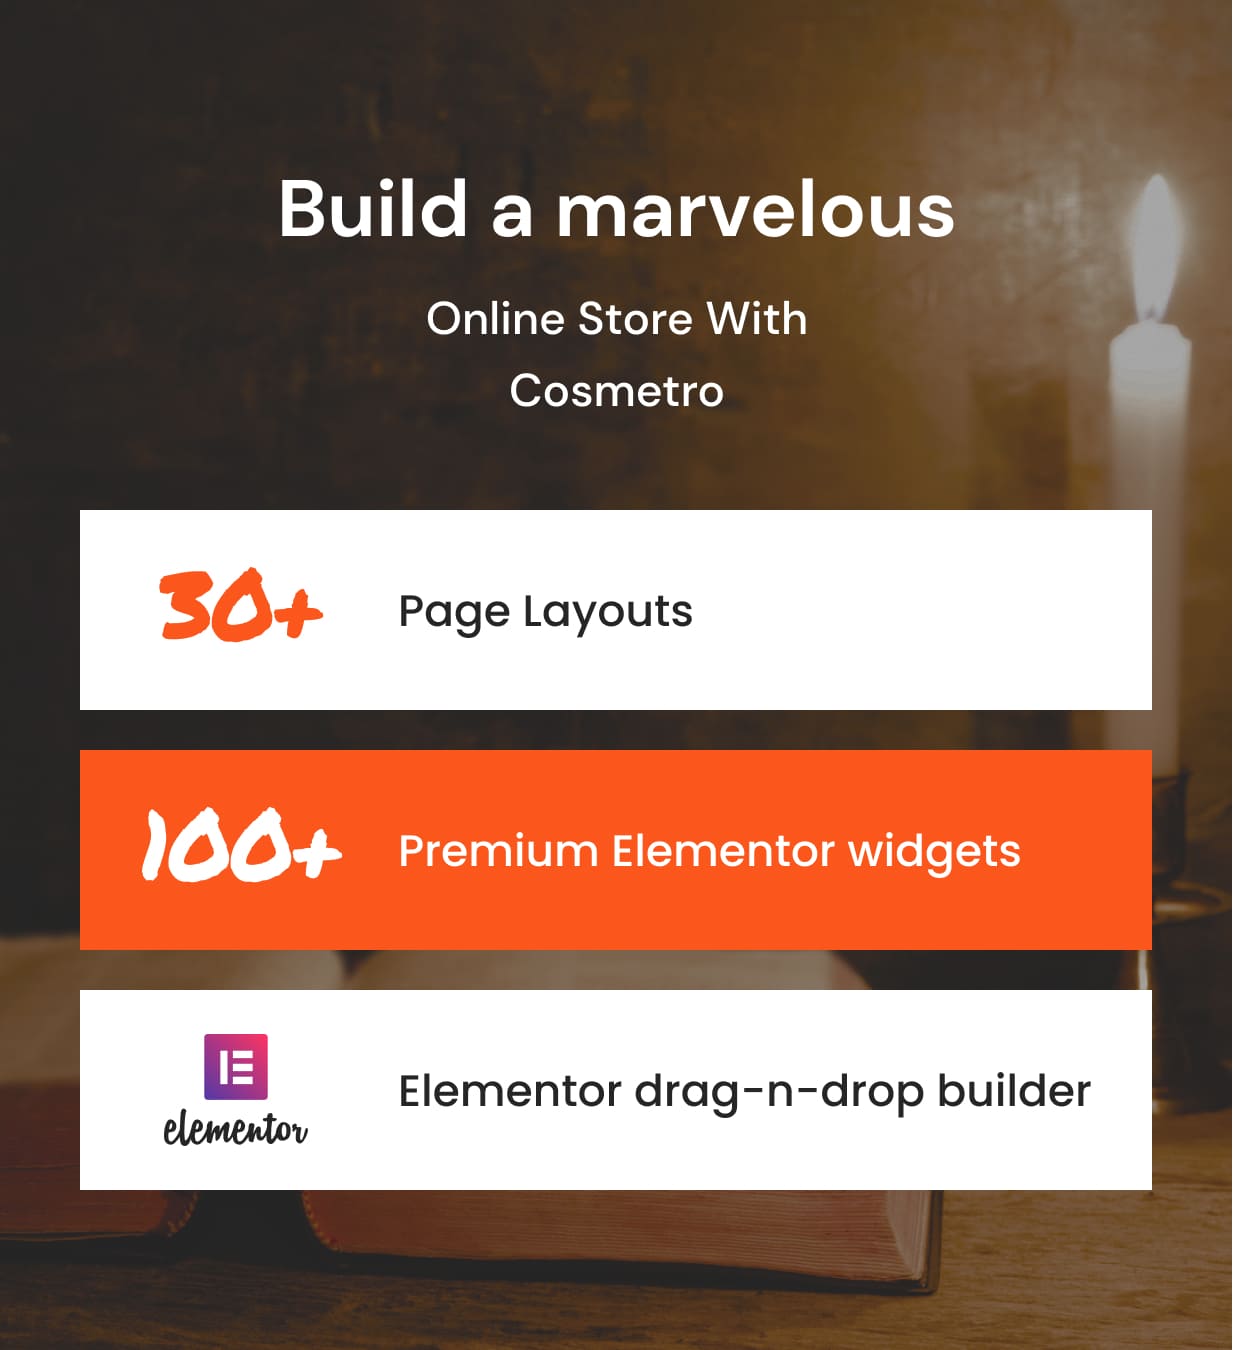 Build a marvelous online store with cosmetro.